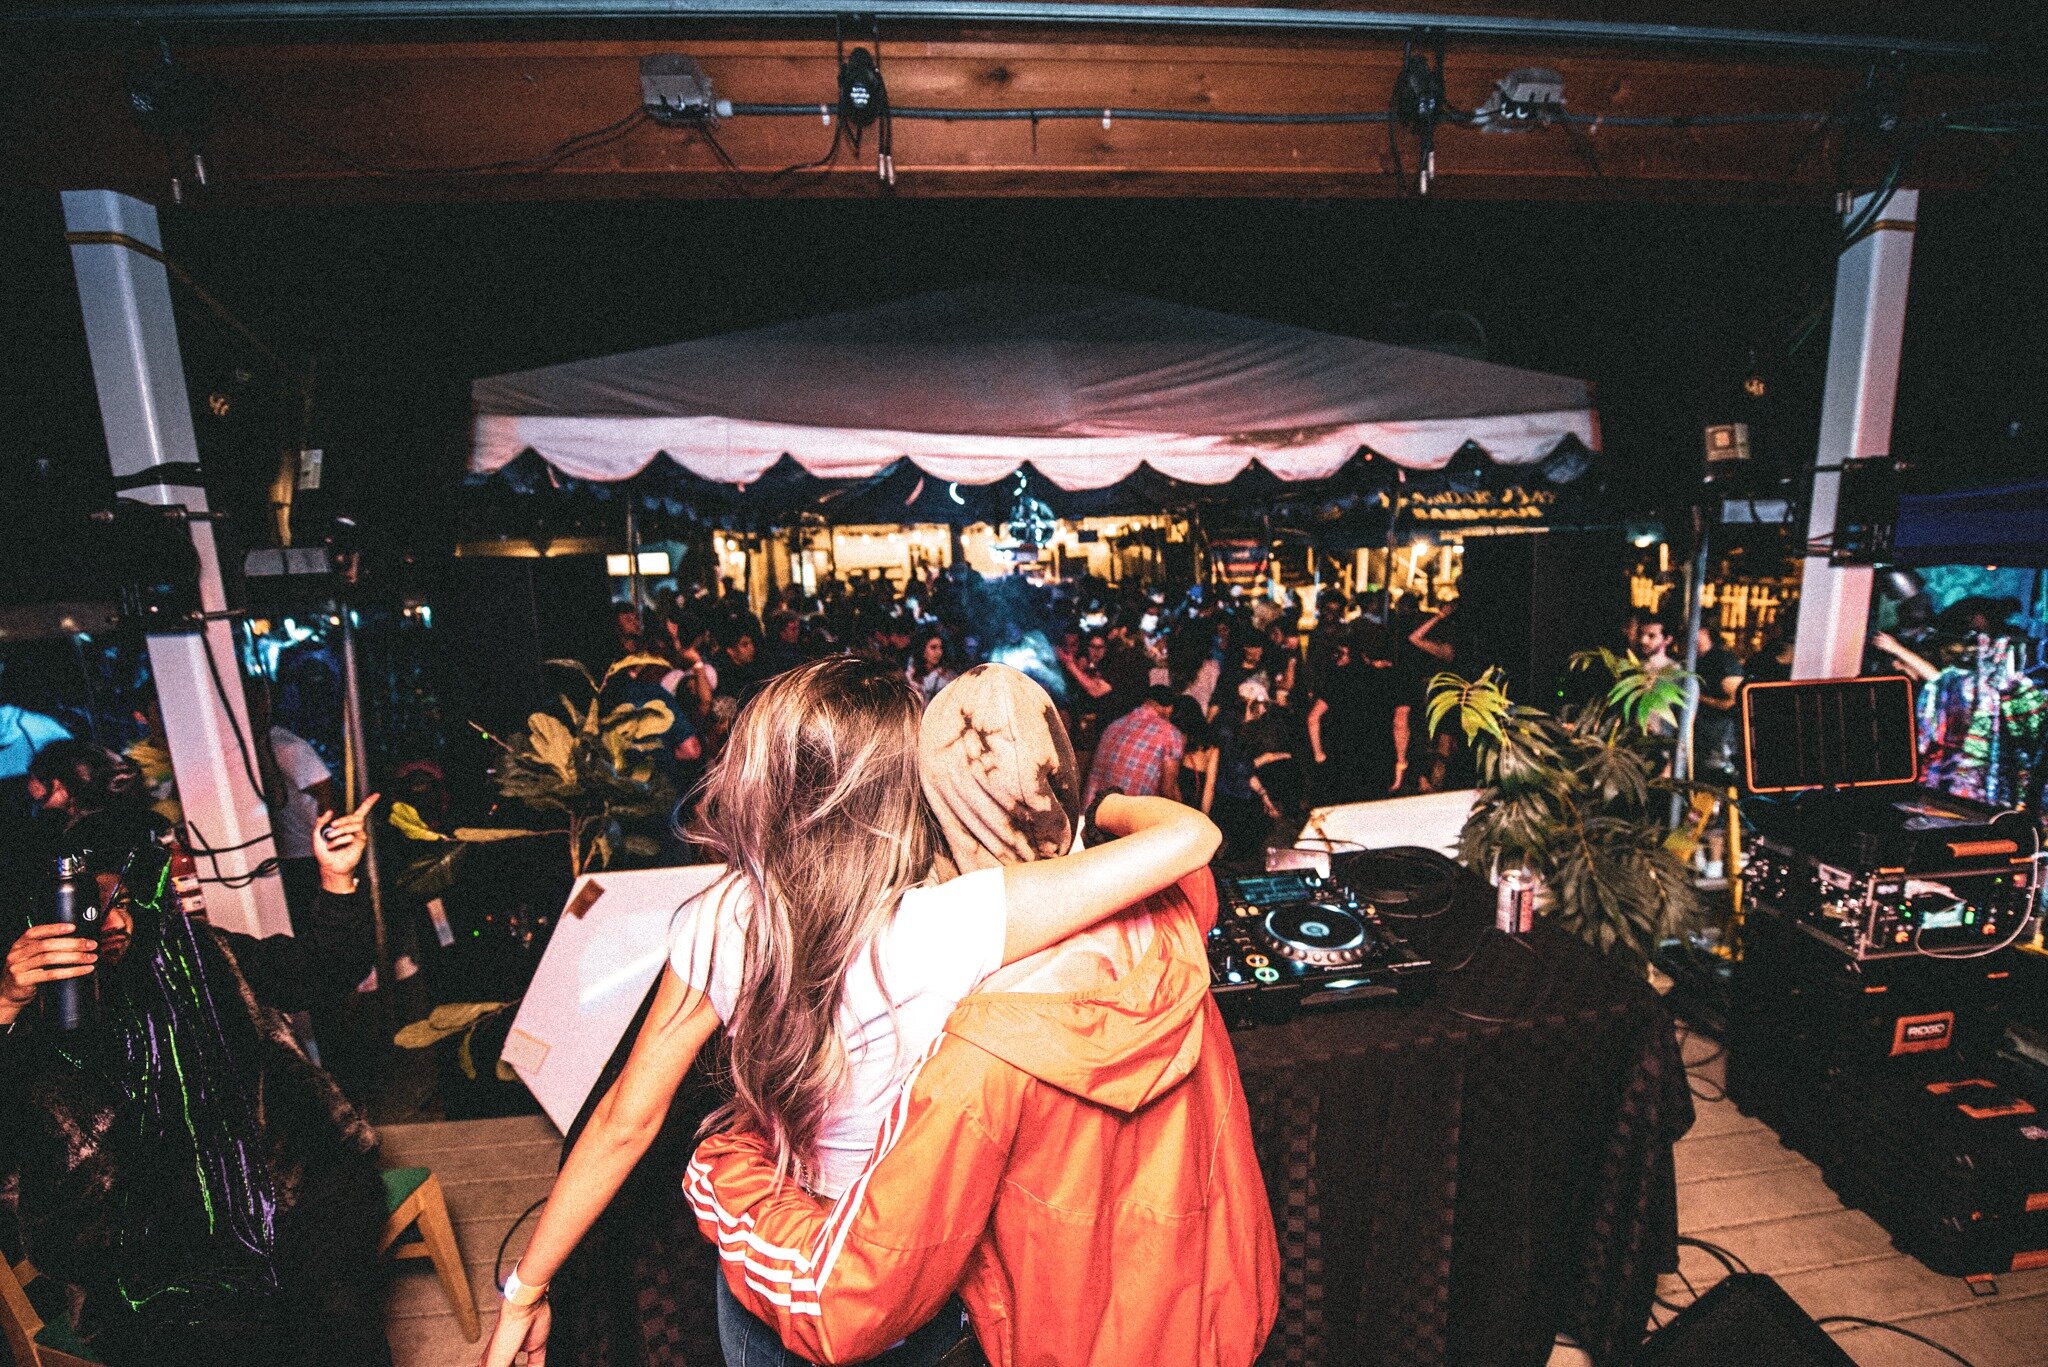 An image of DJ "episcool" and her friend hugging on stage, looking over a large crowd in the beer garden at night.